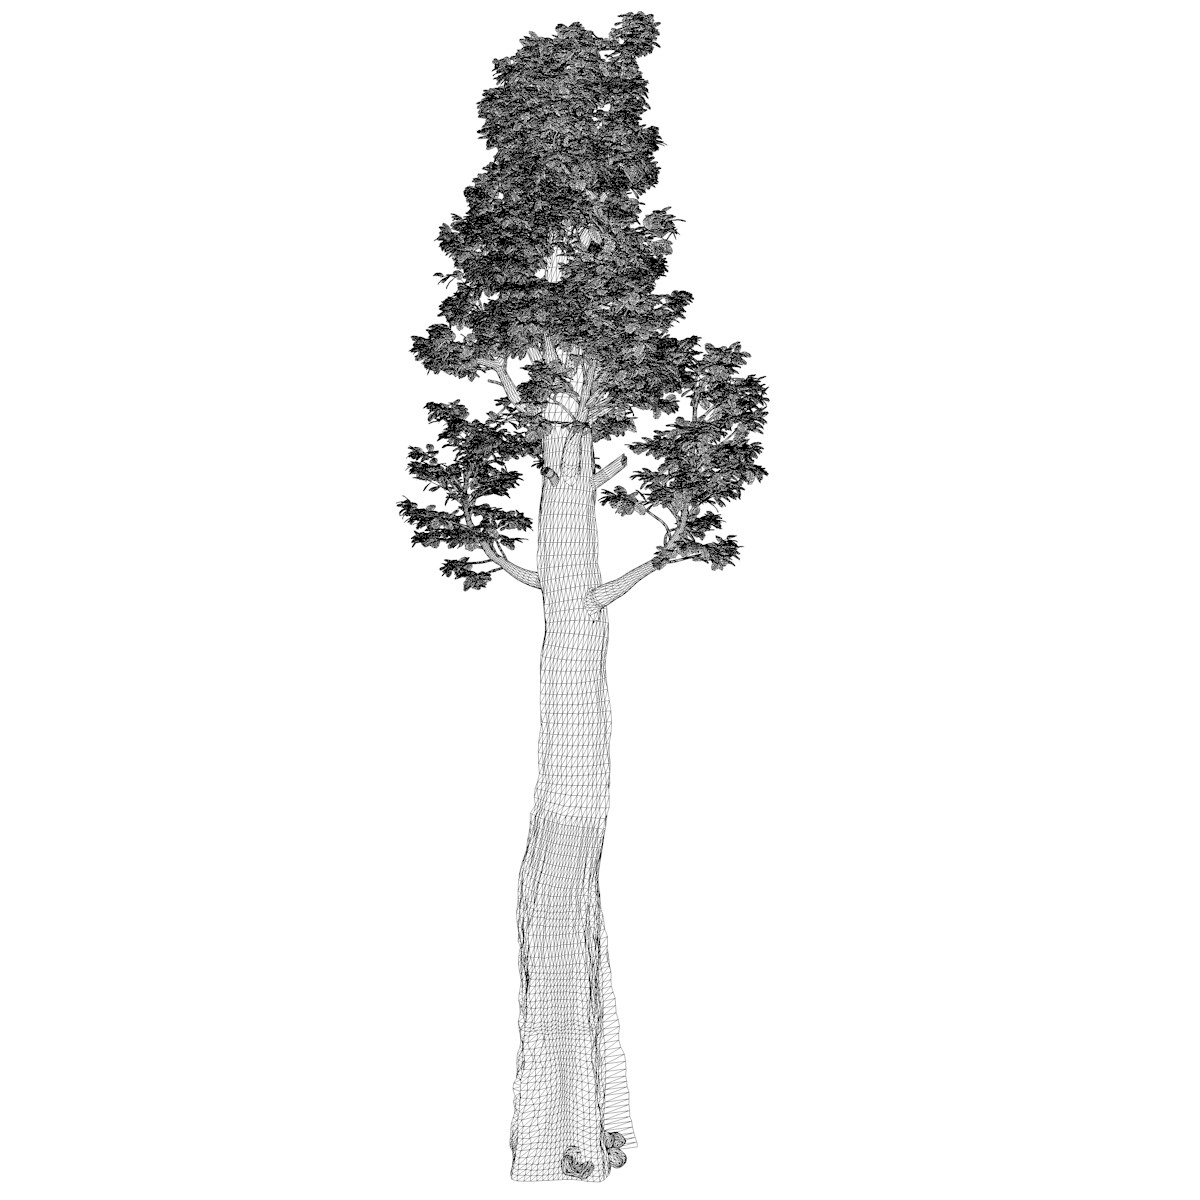 Buy Redwood Tree Drawing Online In India - Etsy India